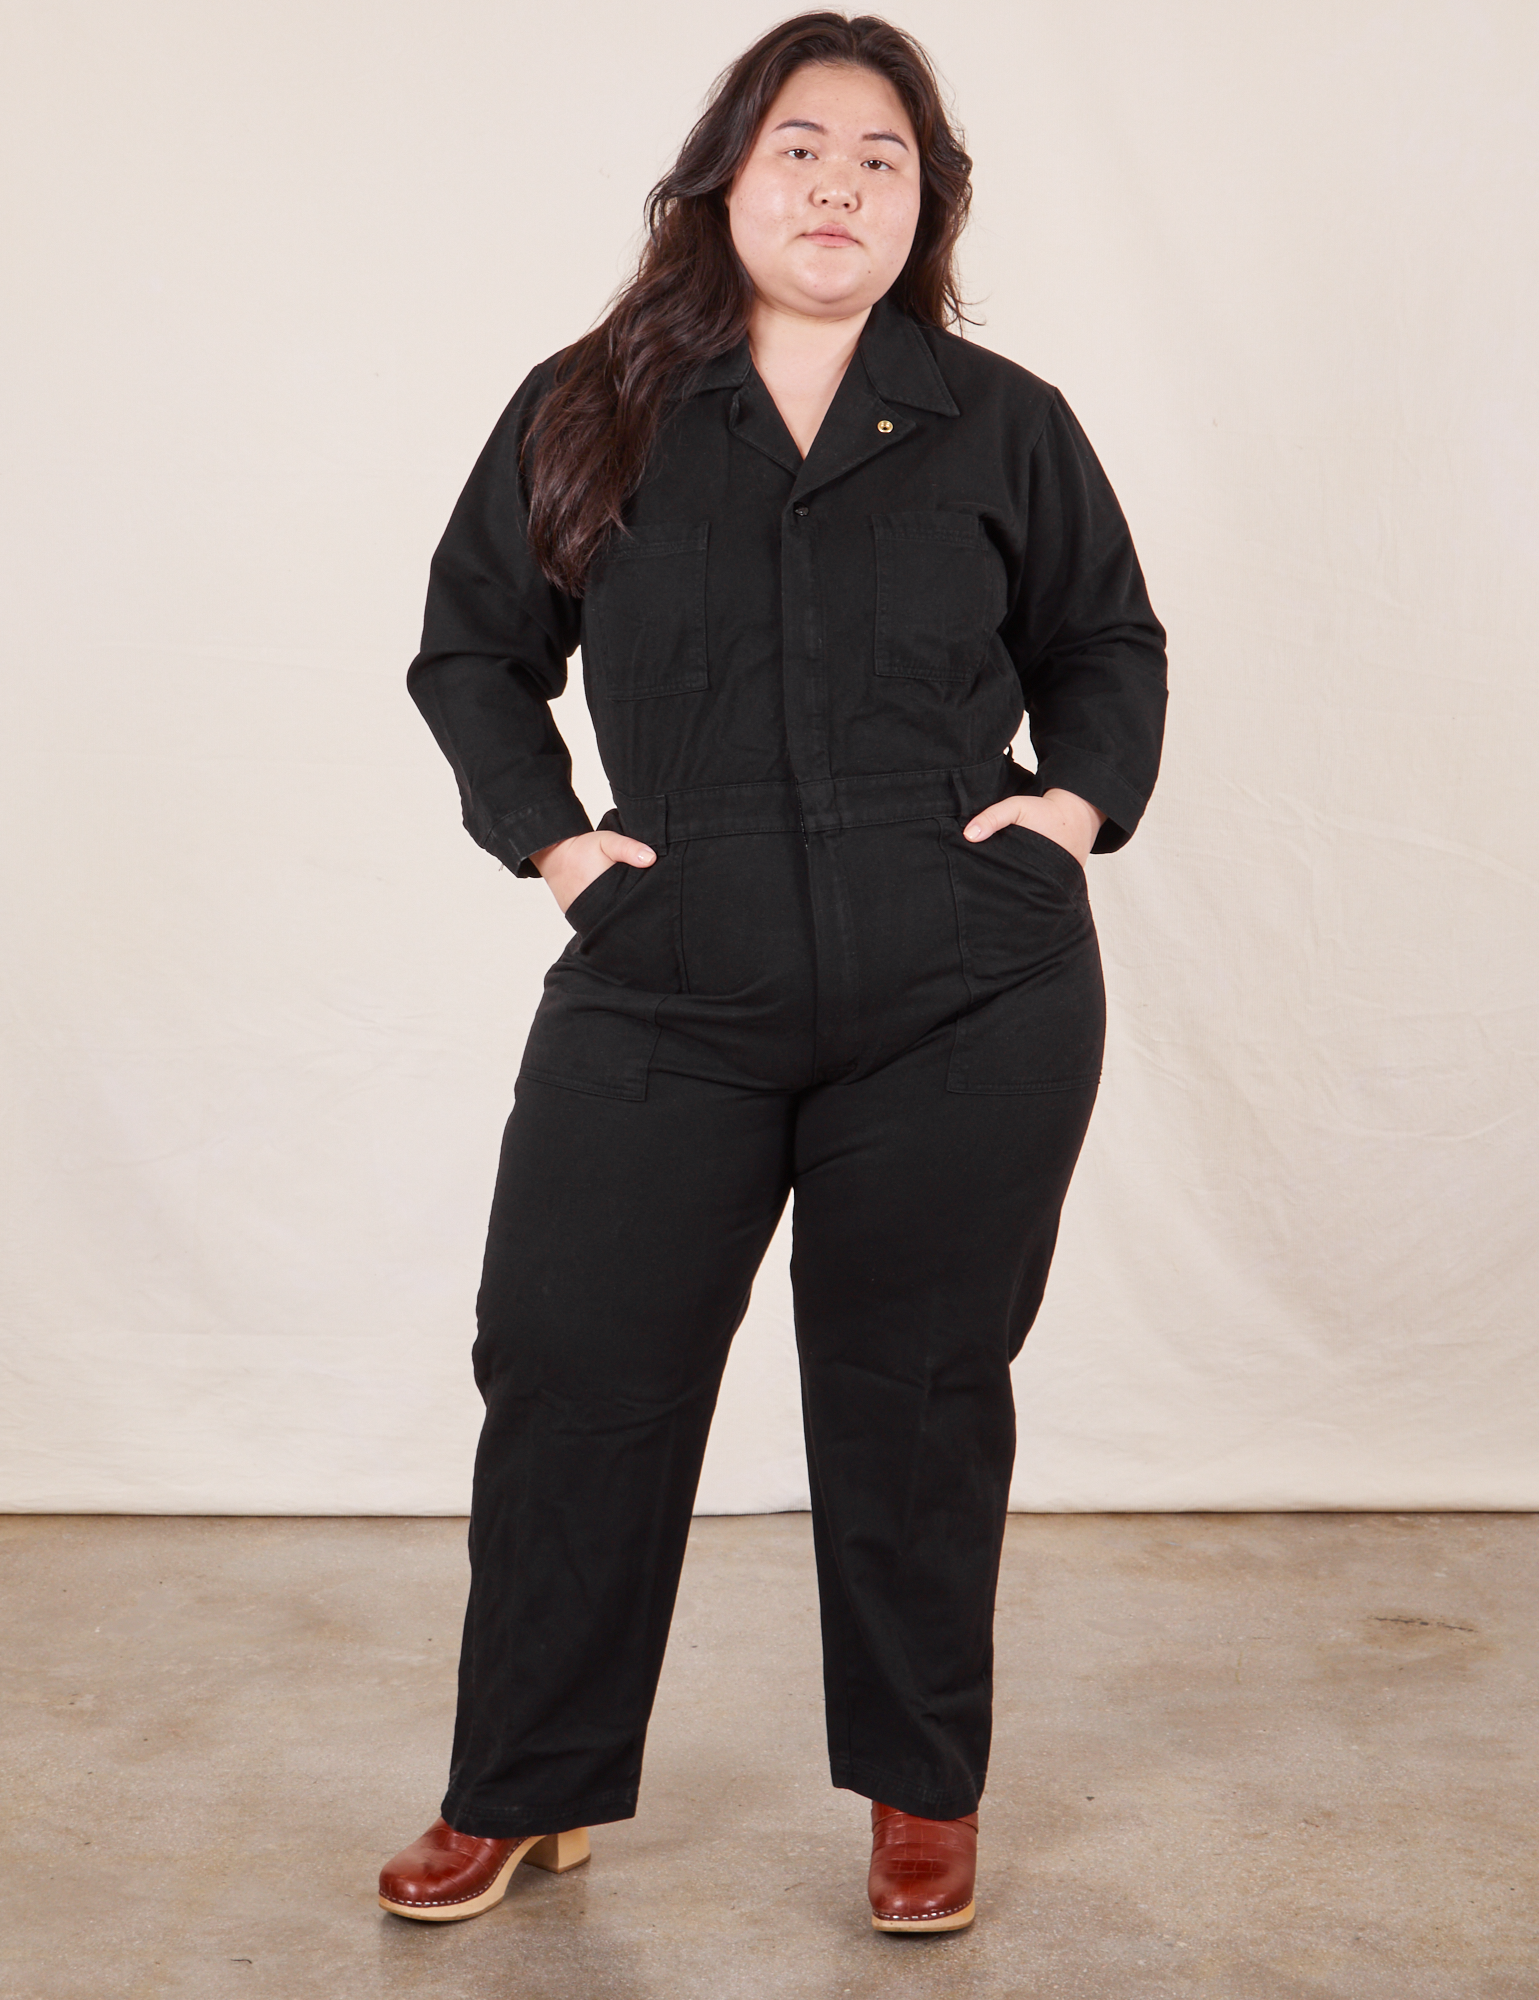 Ashley is 5&#39;7&quot; and wearing 1XL Everyday Jumpsuit in Basic Black